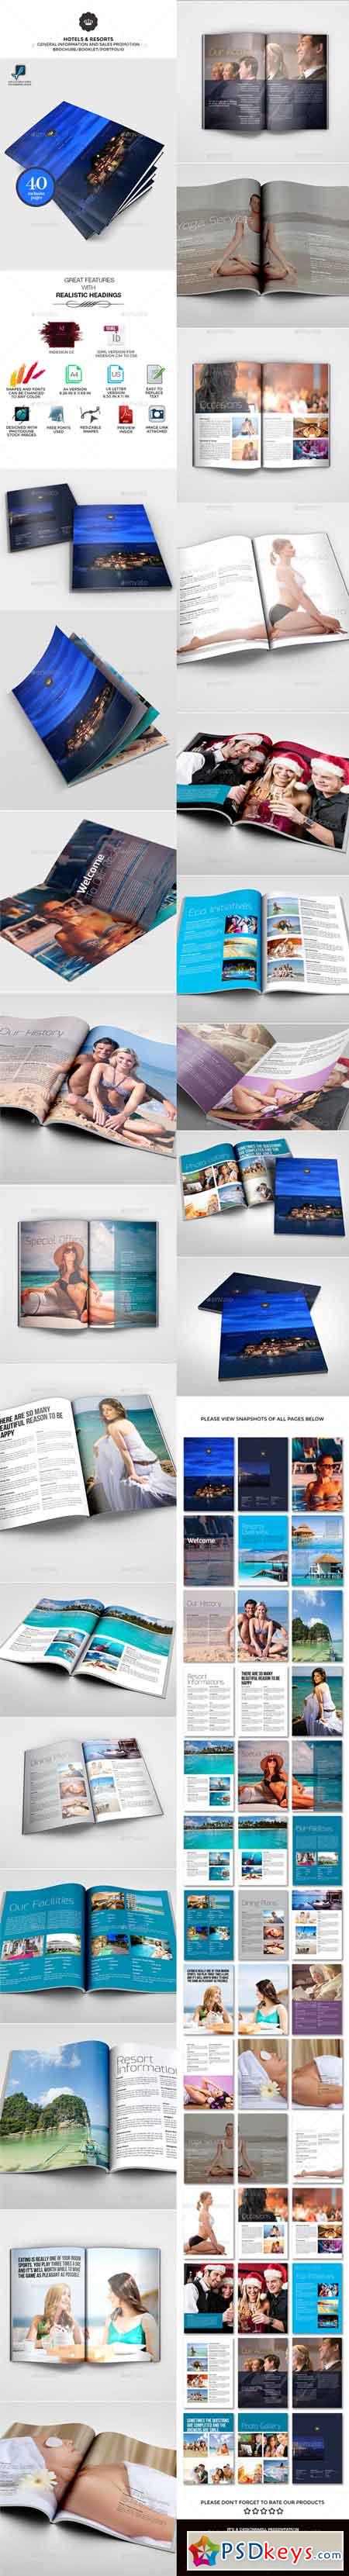 Hotels and Resorts General Information Brochure 9785156